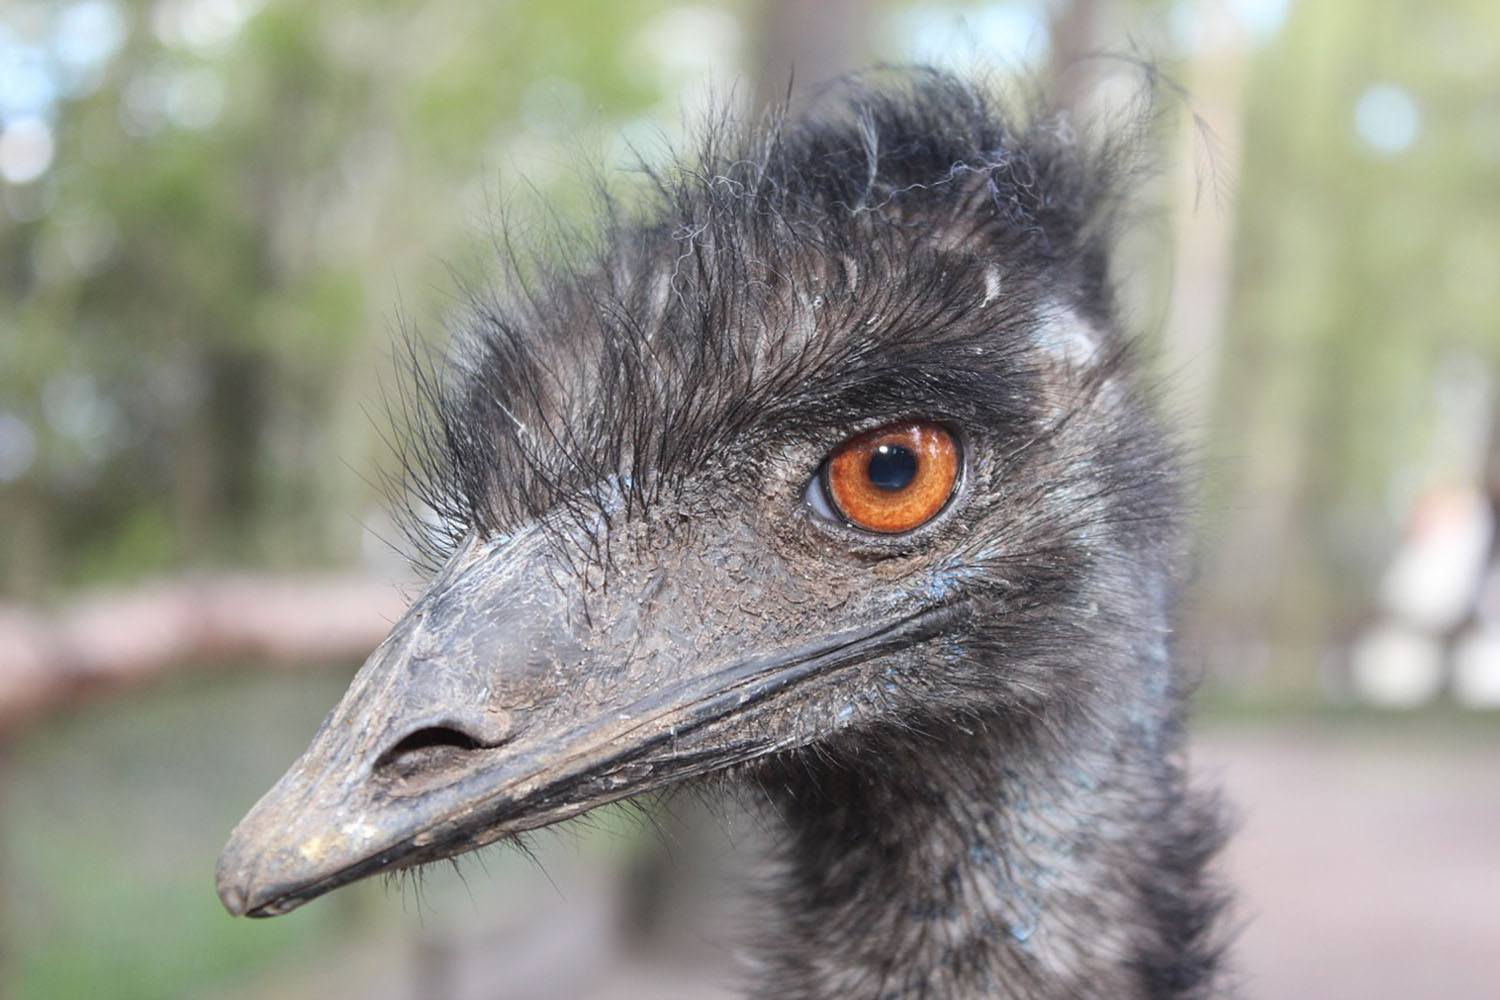 The clever looking emu (photo: HNBS, Pixabay)